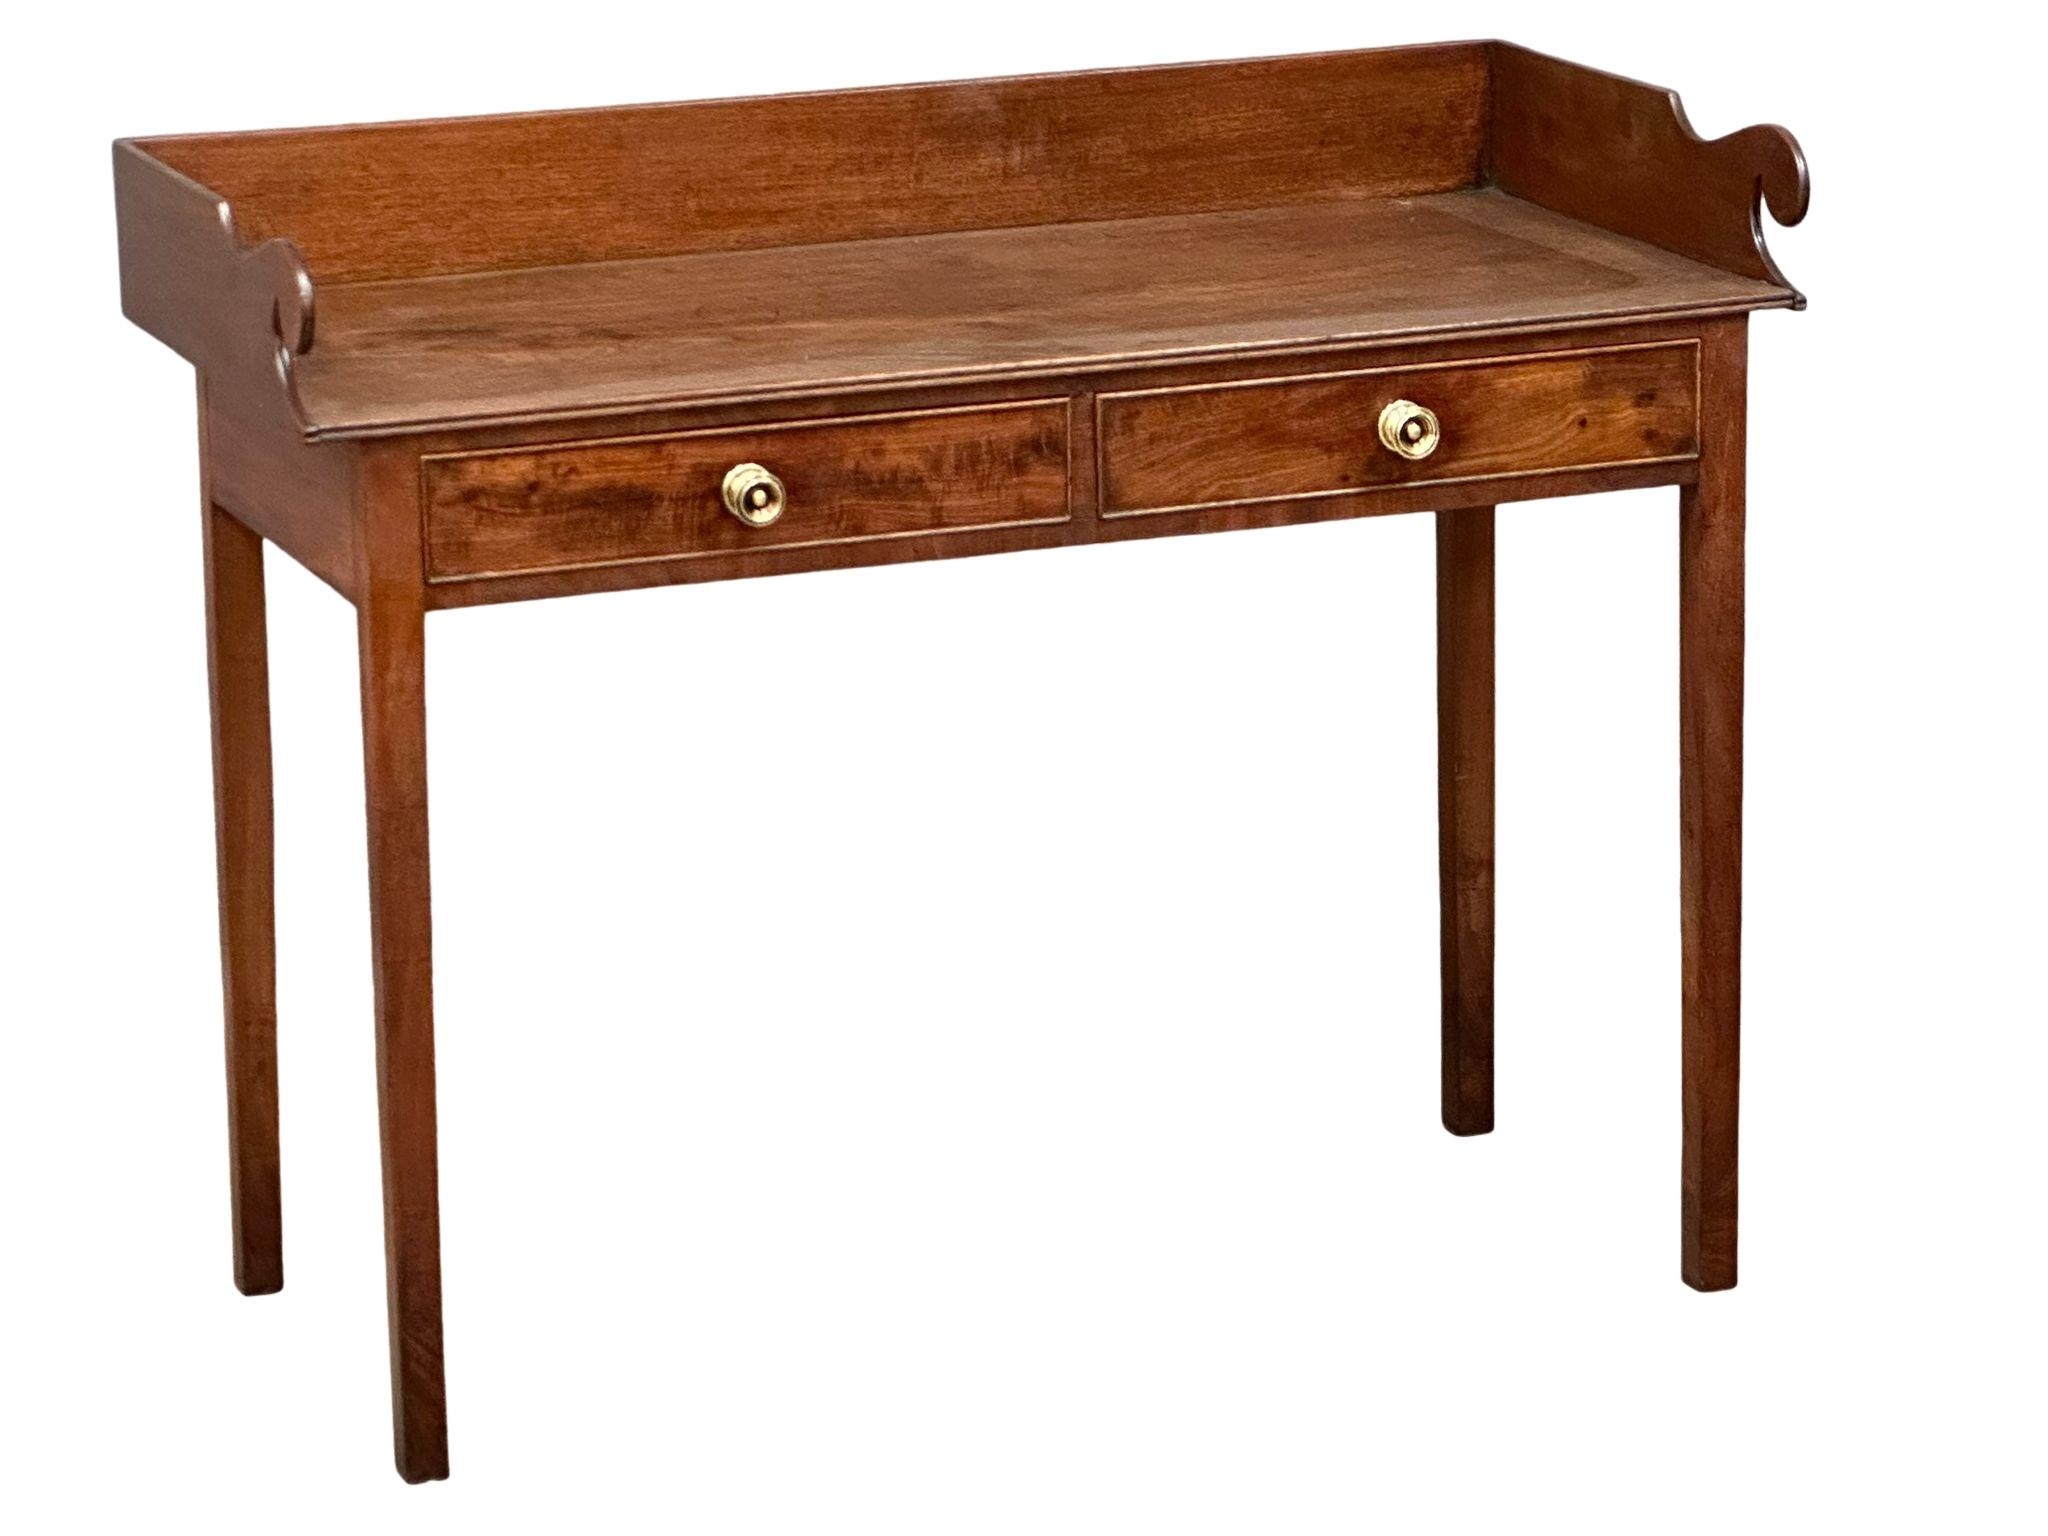 A late George III mahogany gallery back side table/washstand. Circa 1800-1820. 114x55x89cm